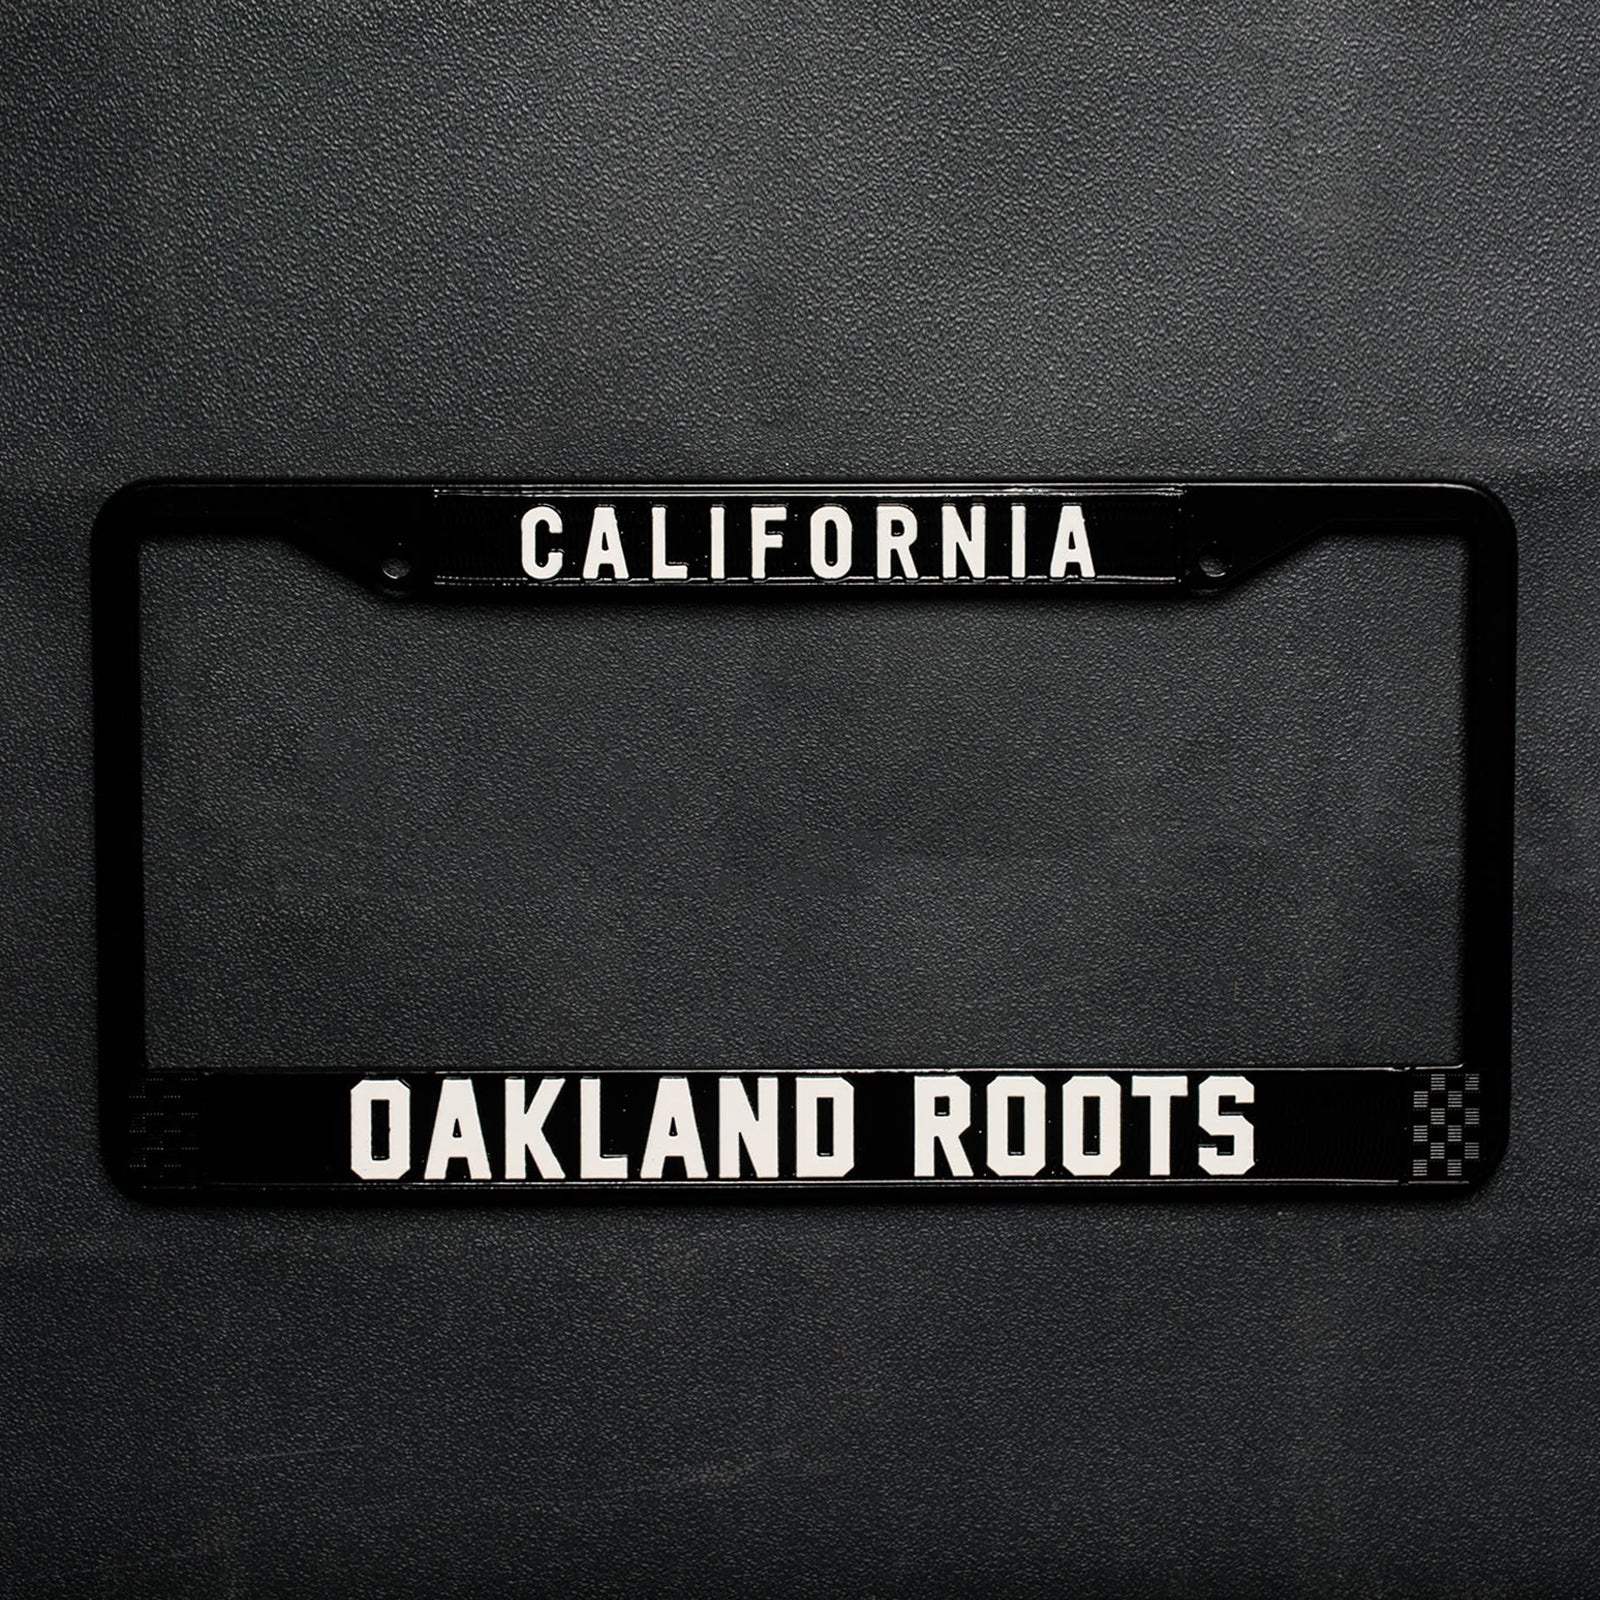 License plate holder with black rims with silver California wordmark on top and Oakland Roots logo on the bottom on a black vinyl background.